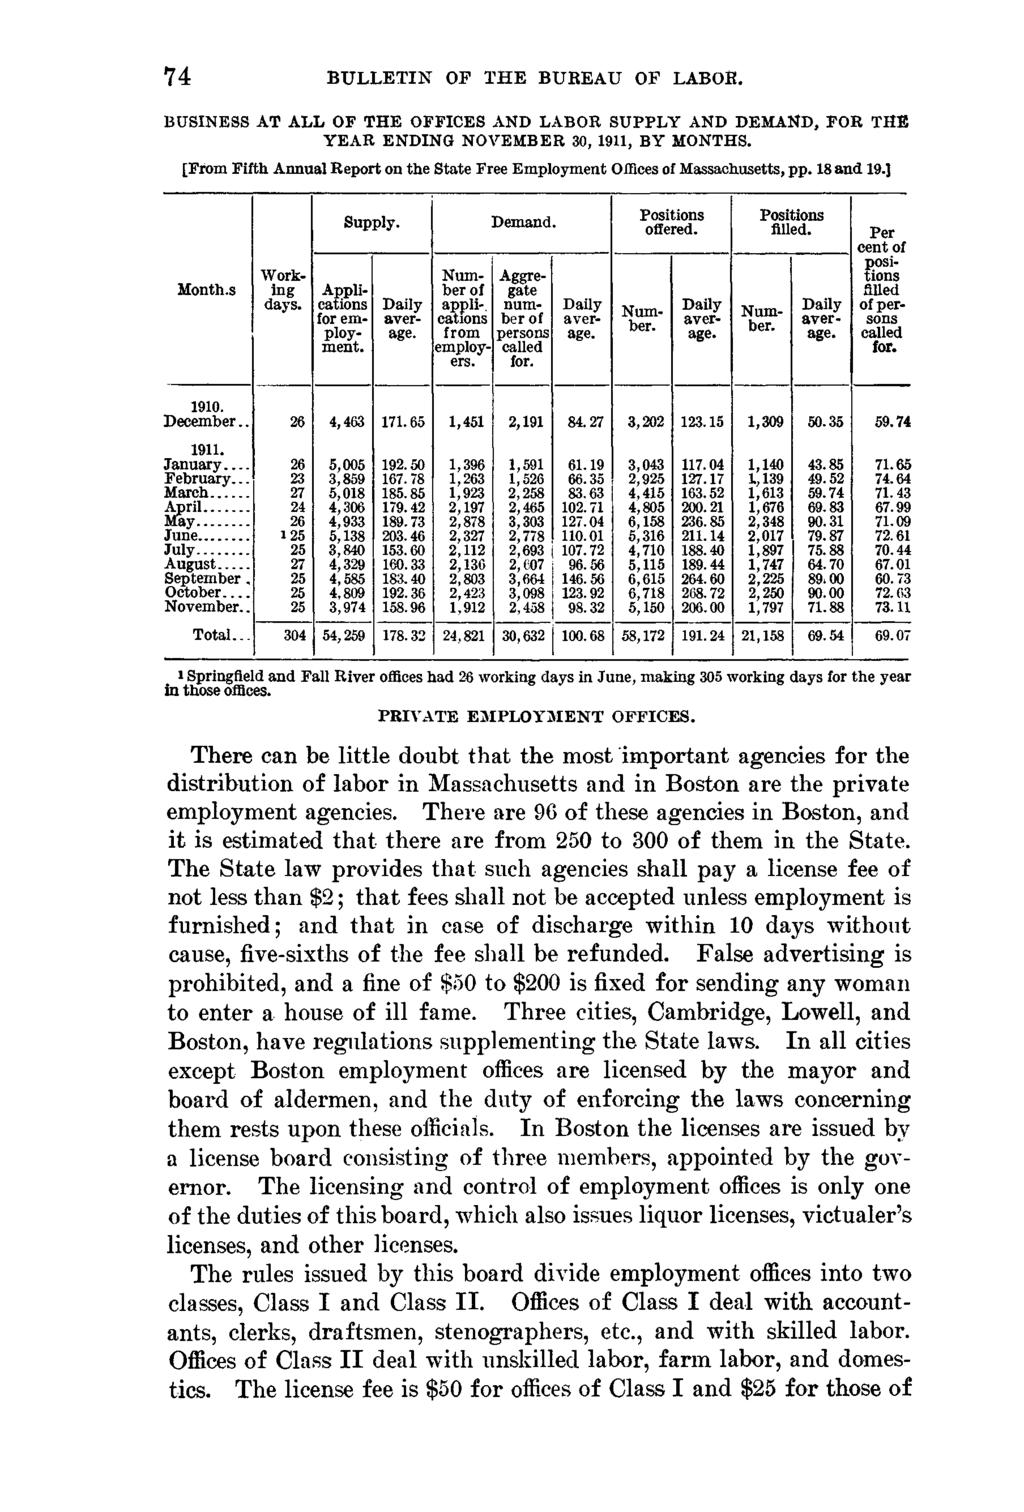 74 BULLETIN OF THE BUREAU OF LABOR. BUSINESS AT ALL OF THE OFFICES AND LABOR SUPPLY AND DEMAND, FOR THE Y EAR ENDING NOVEMBER 30, 1911, BY MONTHS.